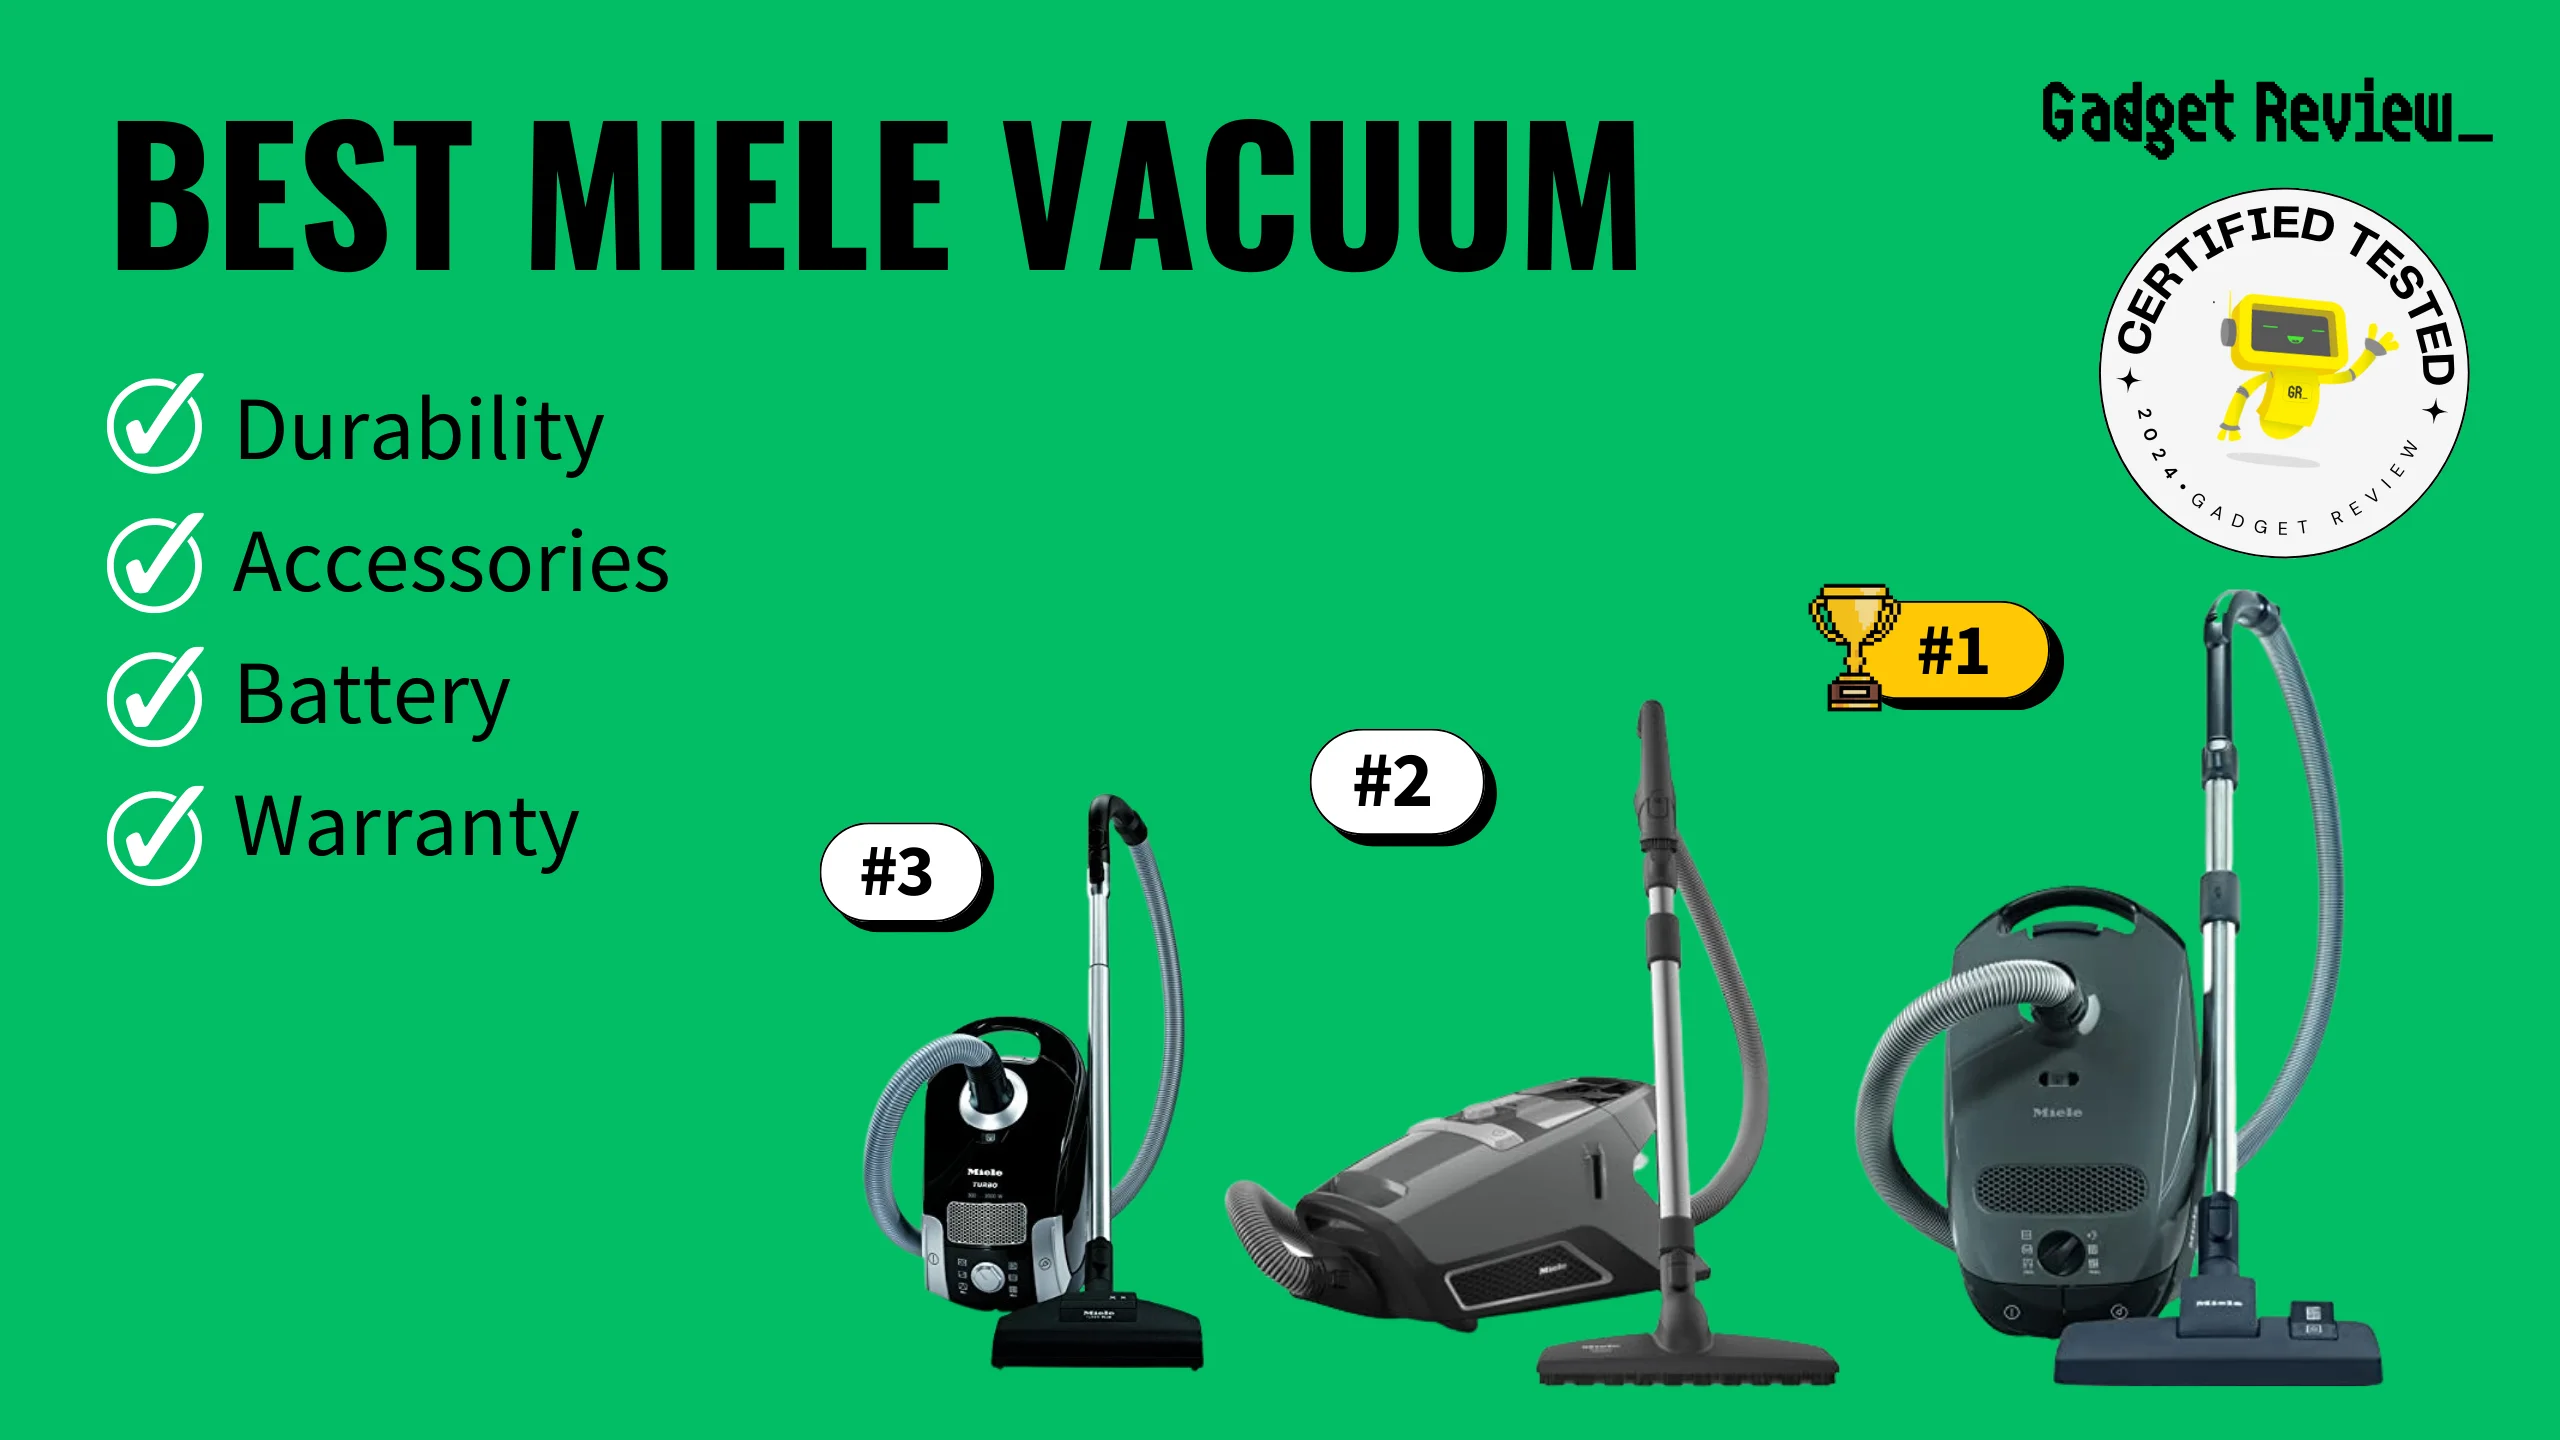 best miele vacuum guide that shows the top best vacuum cleaner model